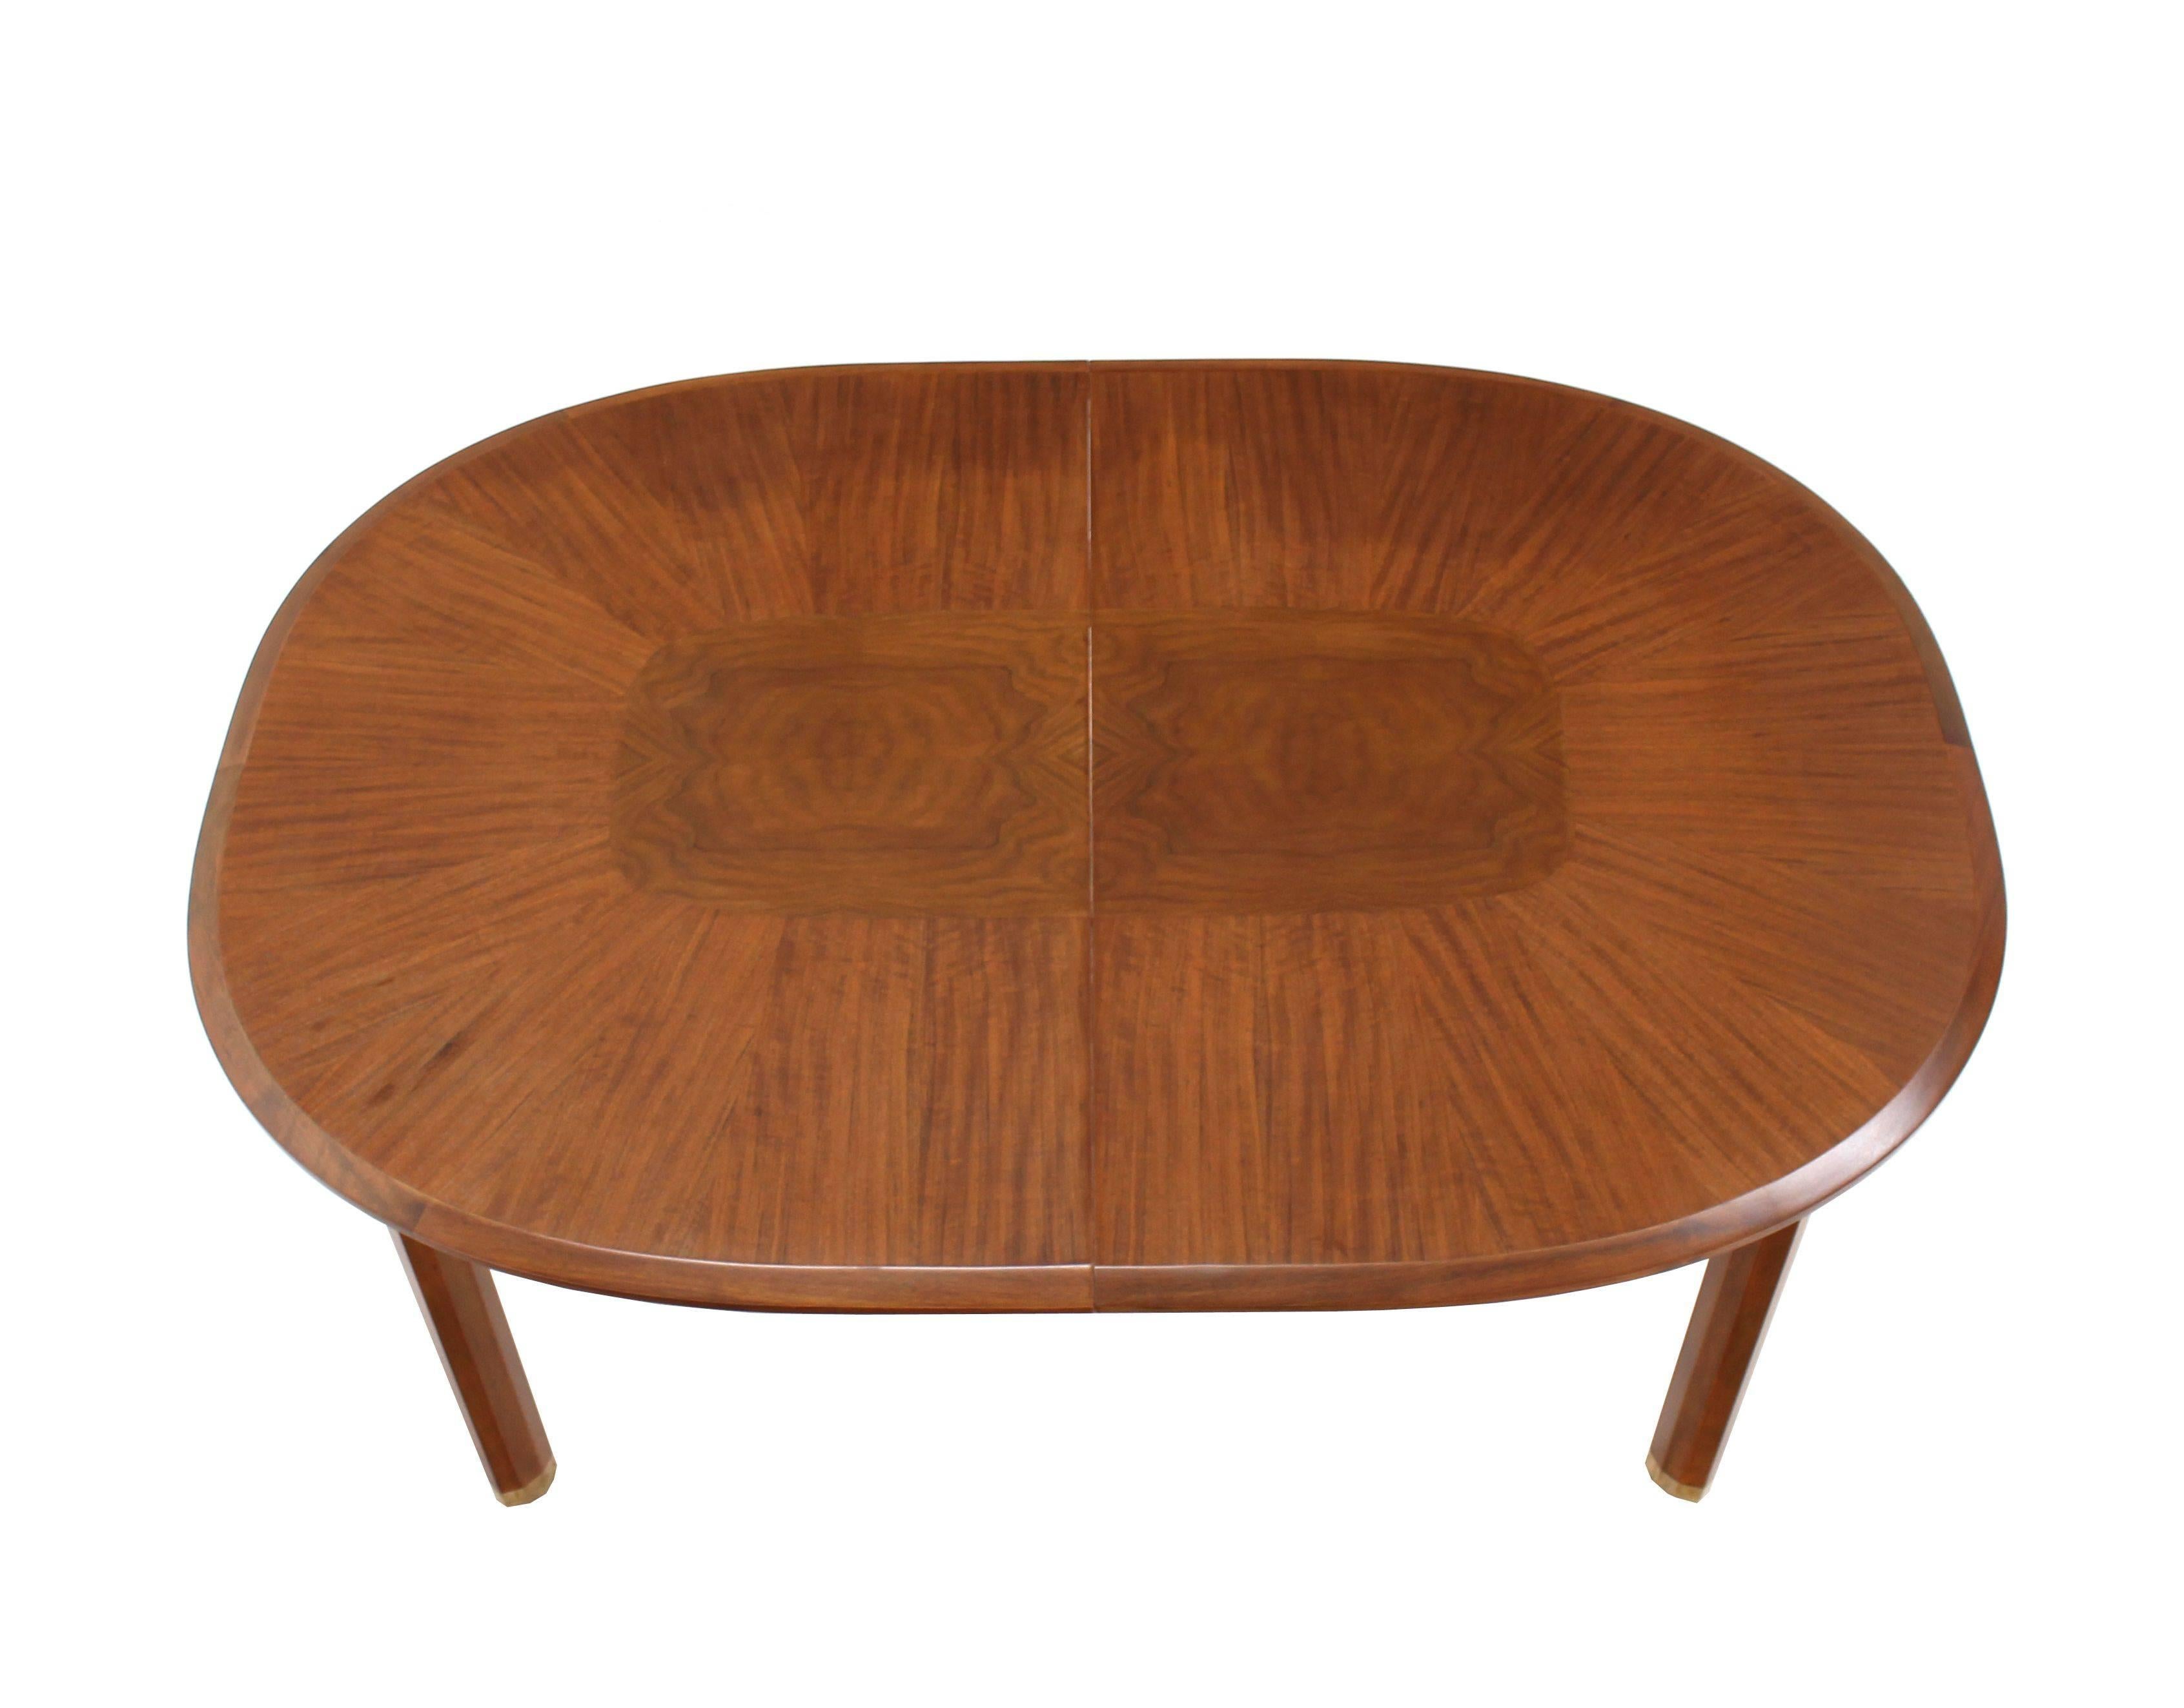 American Edmond Spence Dining Table with Two Leaves For Sale